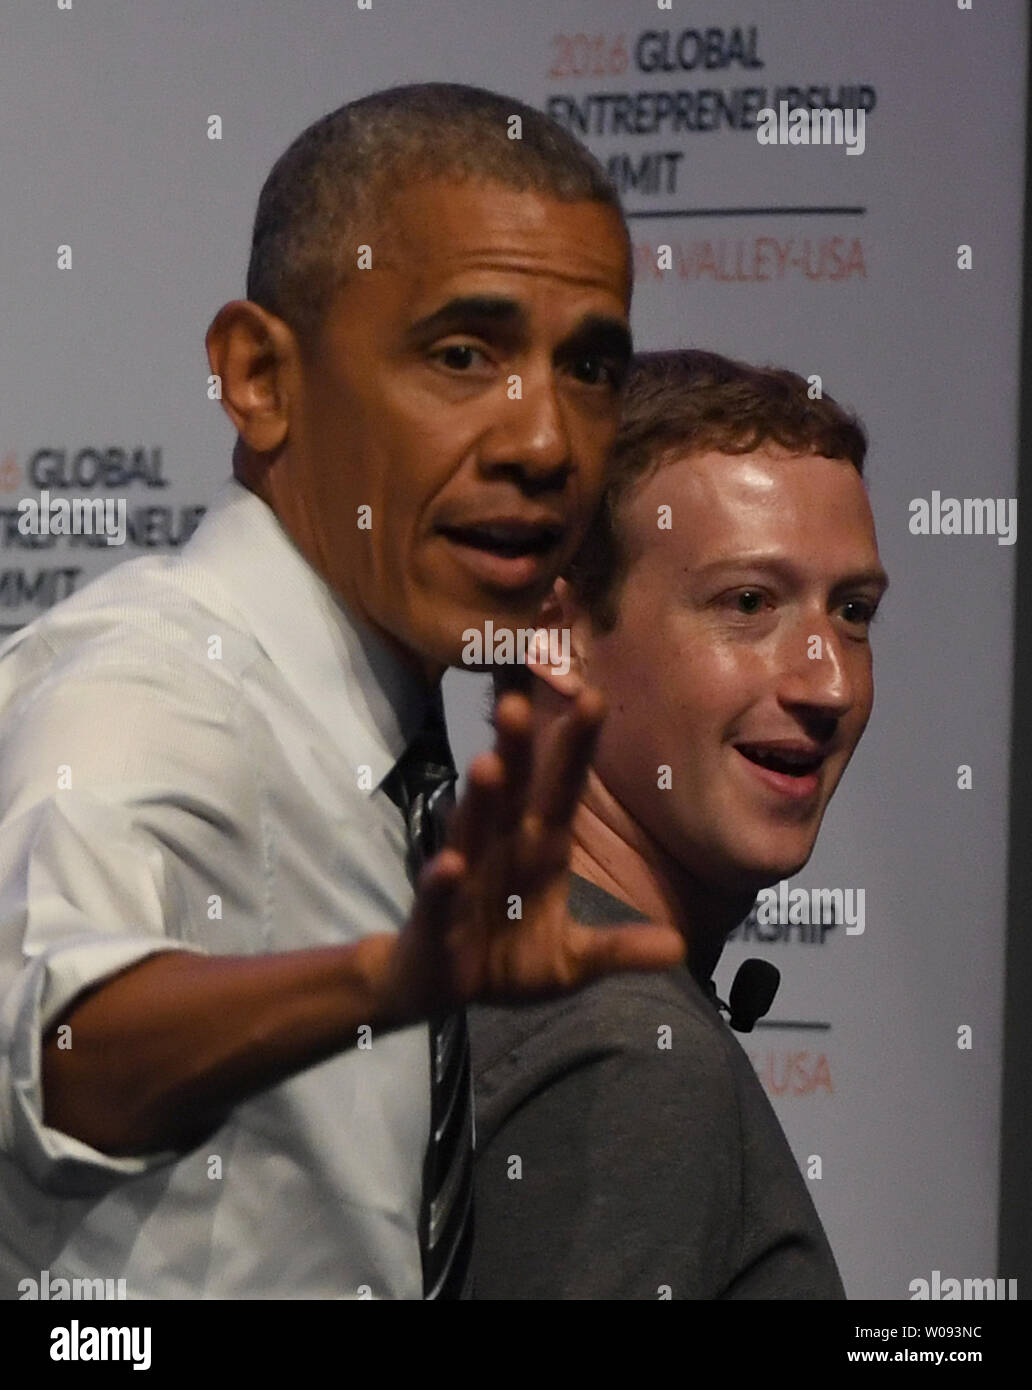 President Barack Obama departs with Facebook founder Mark Zuckerberg after a panel discussion at the Global Entrepreneurship Summit 2016 at Stanford University in Palo Alto, California on June 24,  2016. GES aims to connect American entrepreneurs and investors with international counterparts.          Photo by Terry Schmitt/UPI Stock Photo